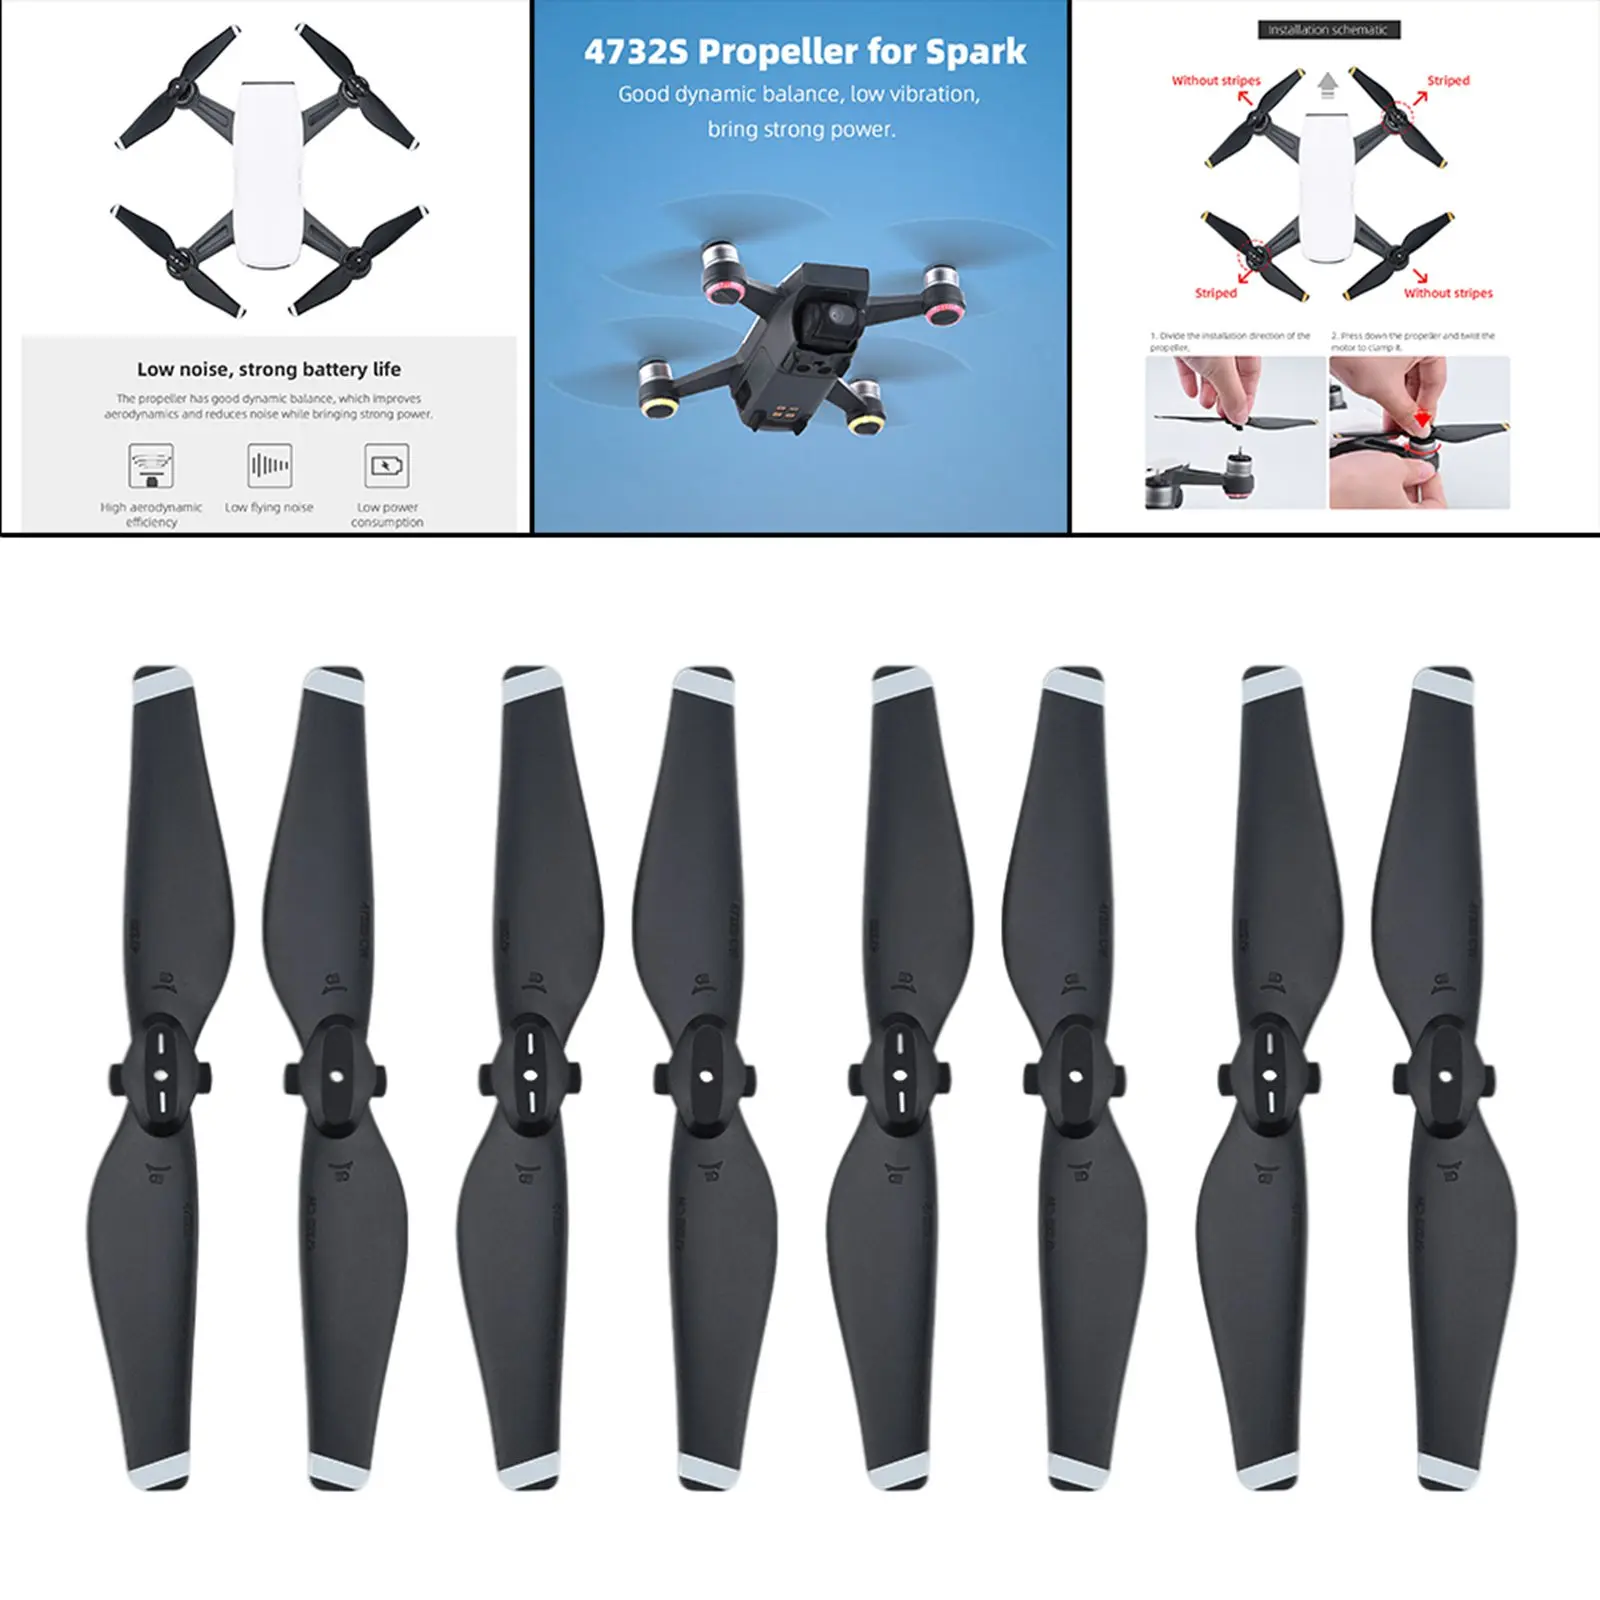 8Pcs Low-Noise Quick Release Propellers Props Set for DJI Spark 4732S RC Drone Quadcopter Spare Parts